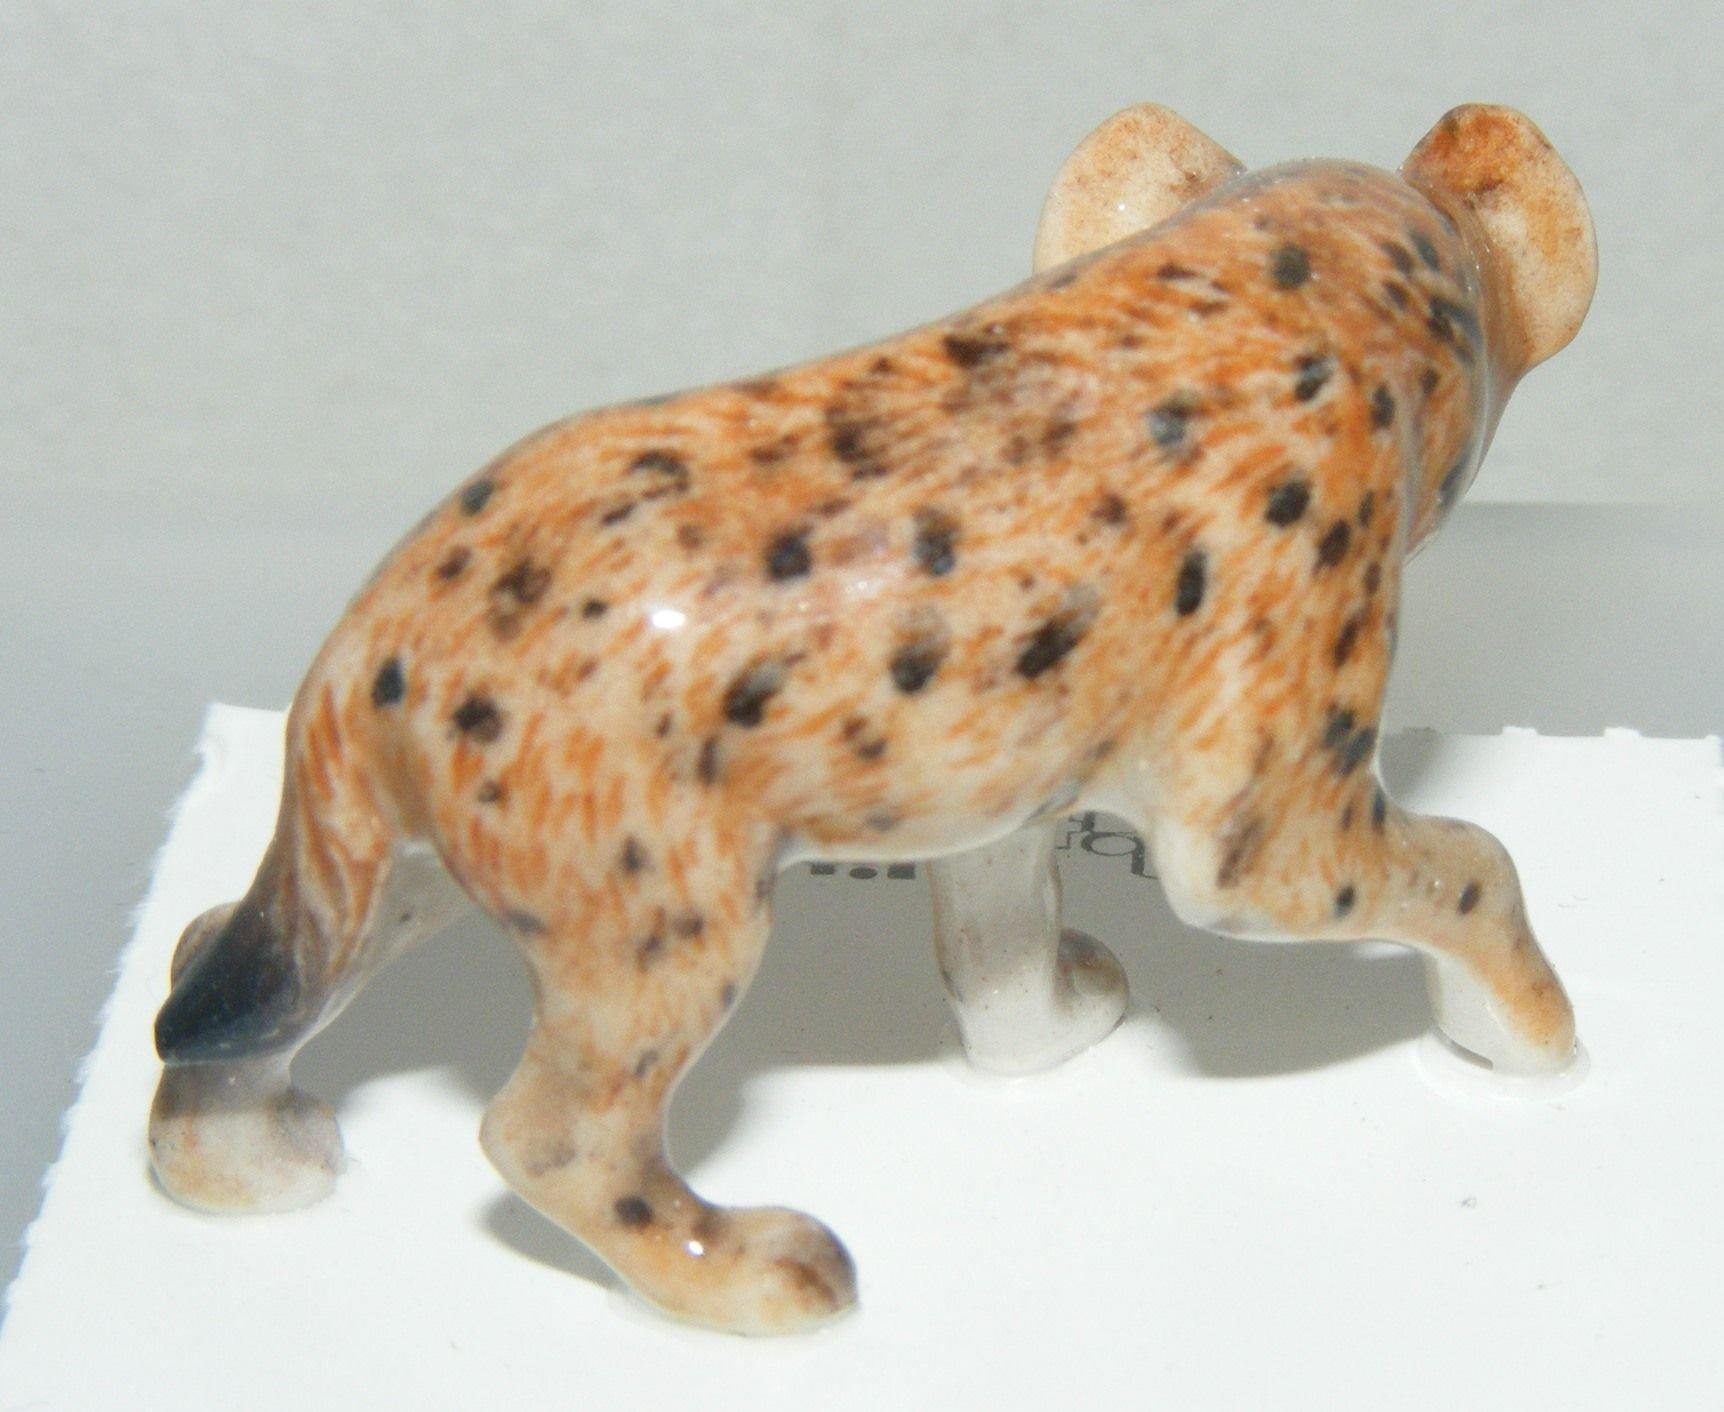 Little Critterz Miniature Porcelain Animal Figure Spotted Hyena "Whoop" LC822 